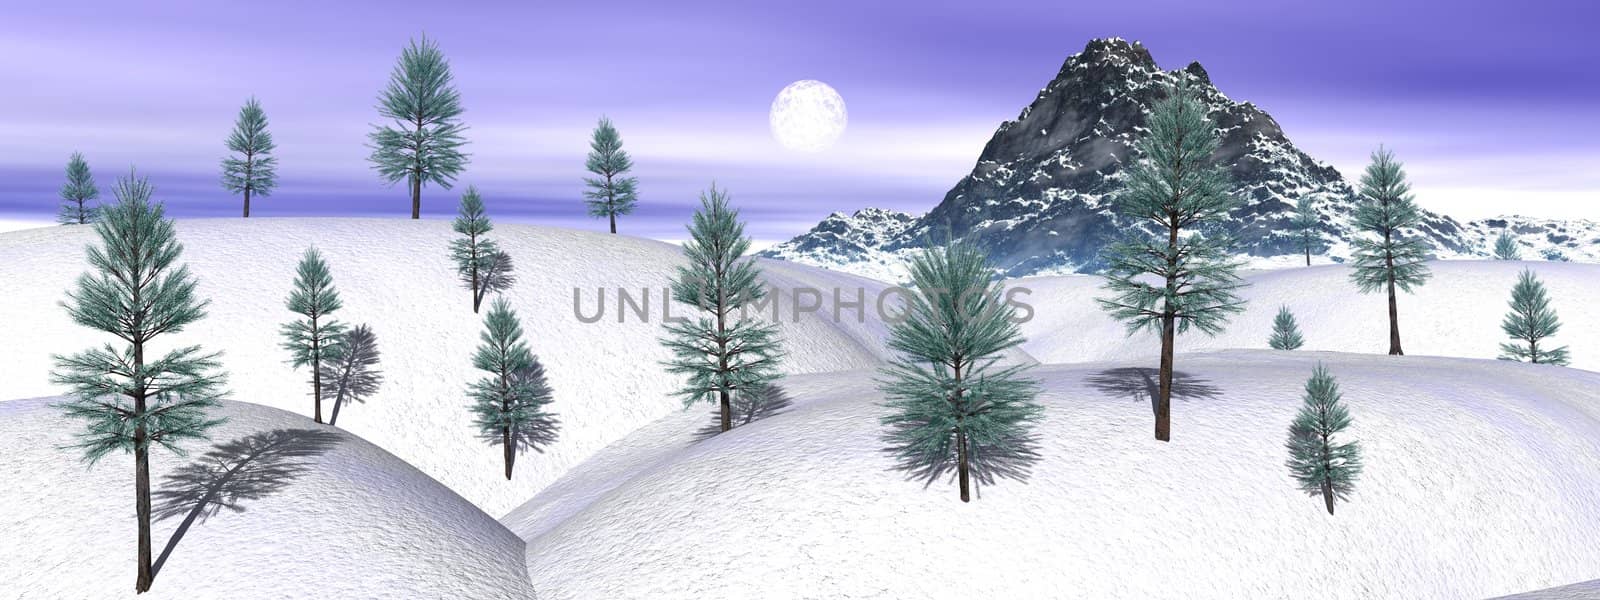 Trees, hills, rock and moon in a snowy winter landscape